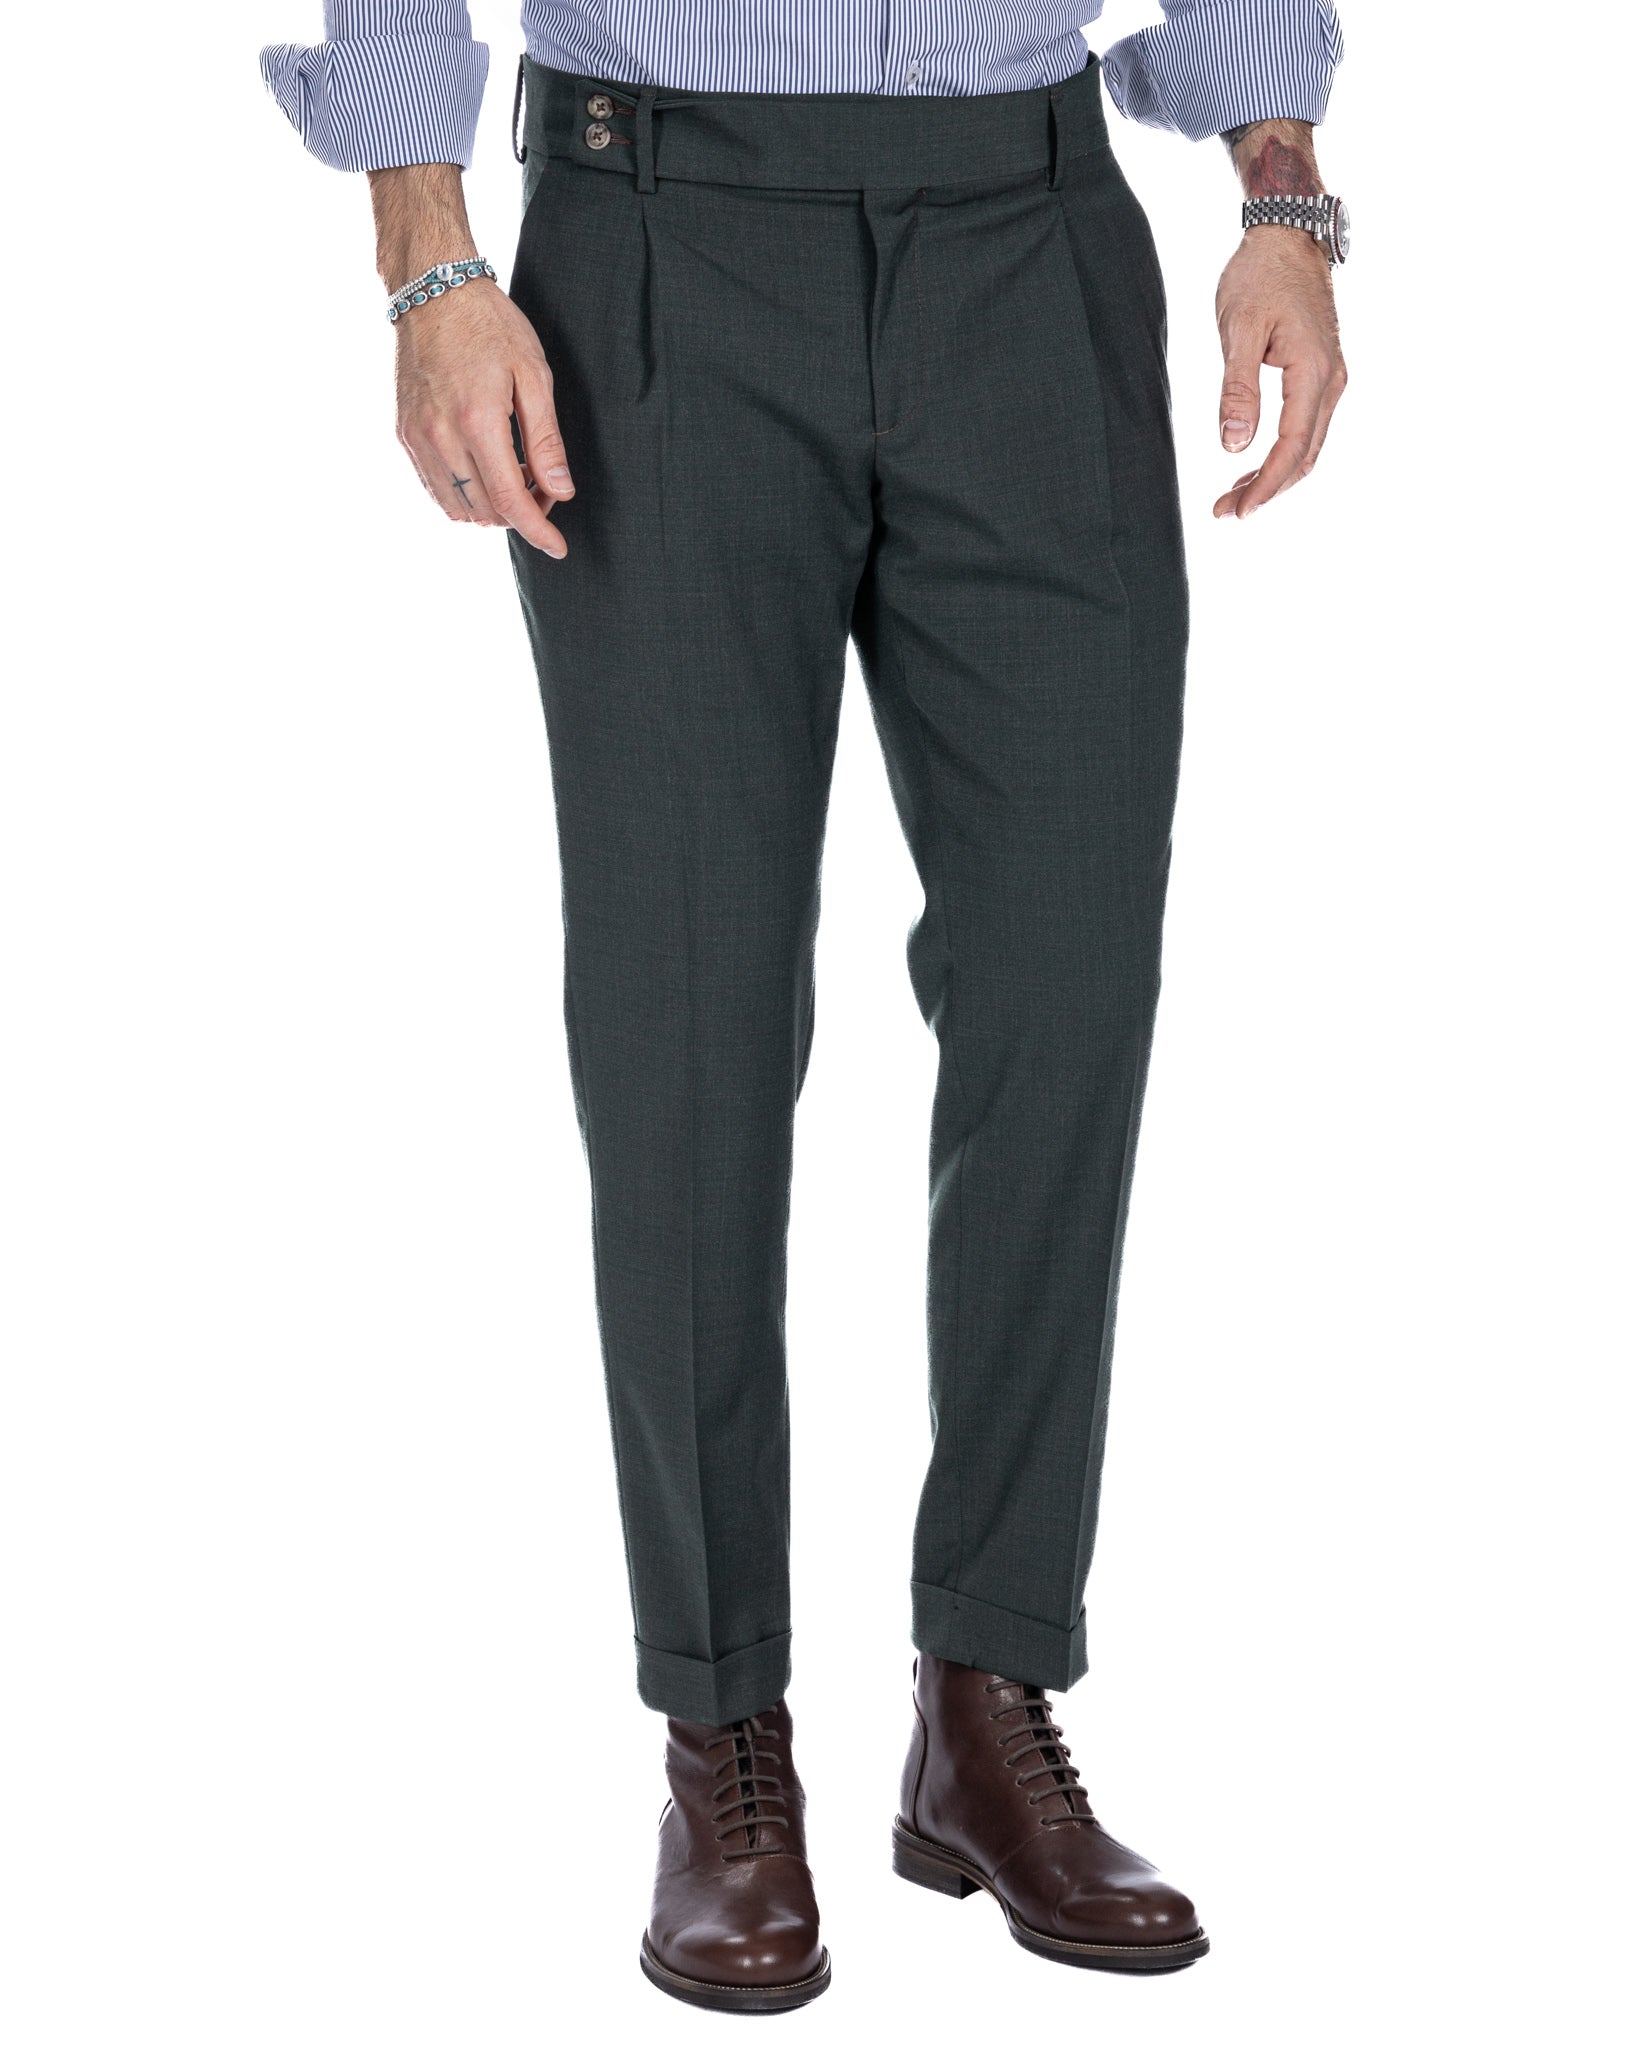 Italian - high-waisted military trousers in wool blend